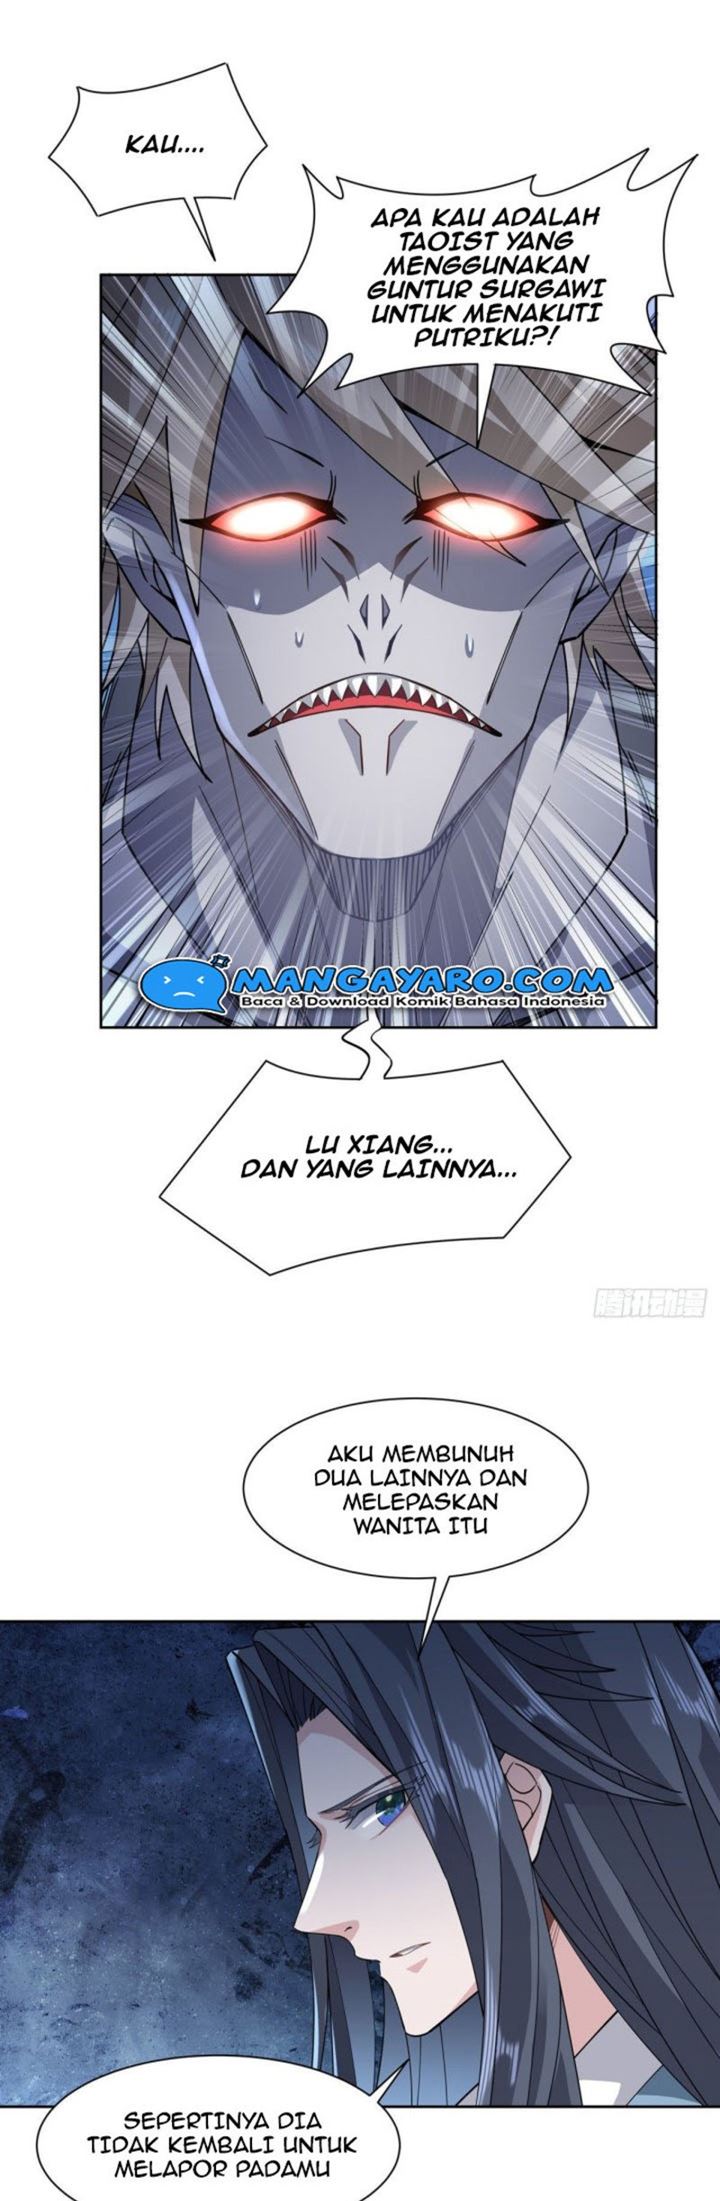 Dilarang COPAS - situs resmi www.mangacanblog.com - Komik my female apprentices are all big shots from the future 020 - chapter 20 21 Indonesia my female apprentices are all big shots from the future 020 - chapter 20 Terbaru 26|Baca Manga Komik Indonesia|Mangacan